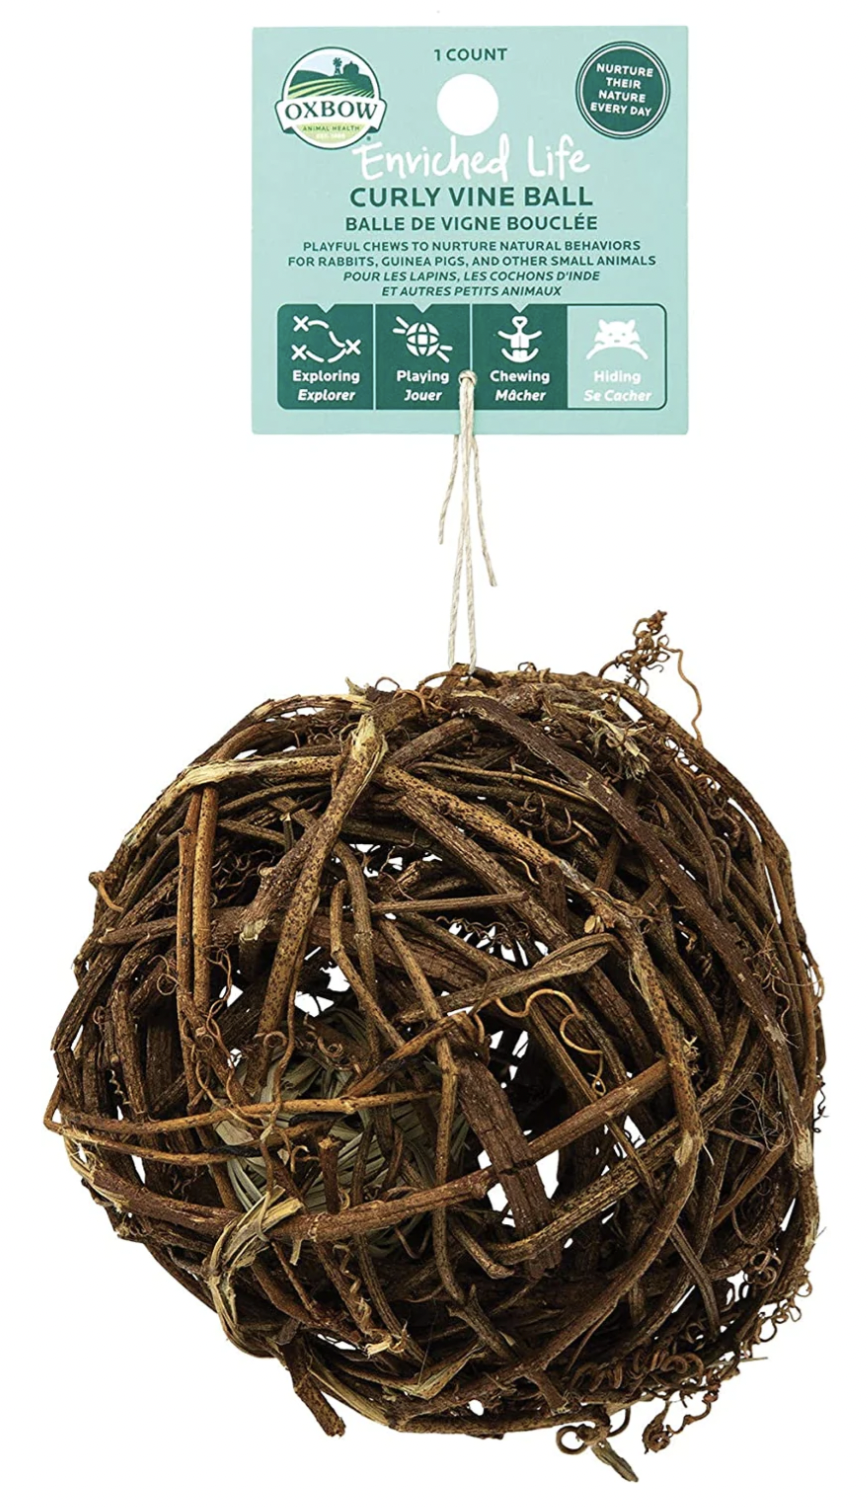 Green packaging with a branch ball toy for small animal by oxbow